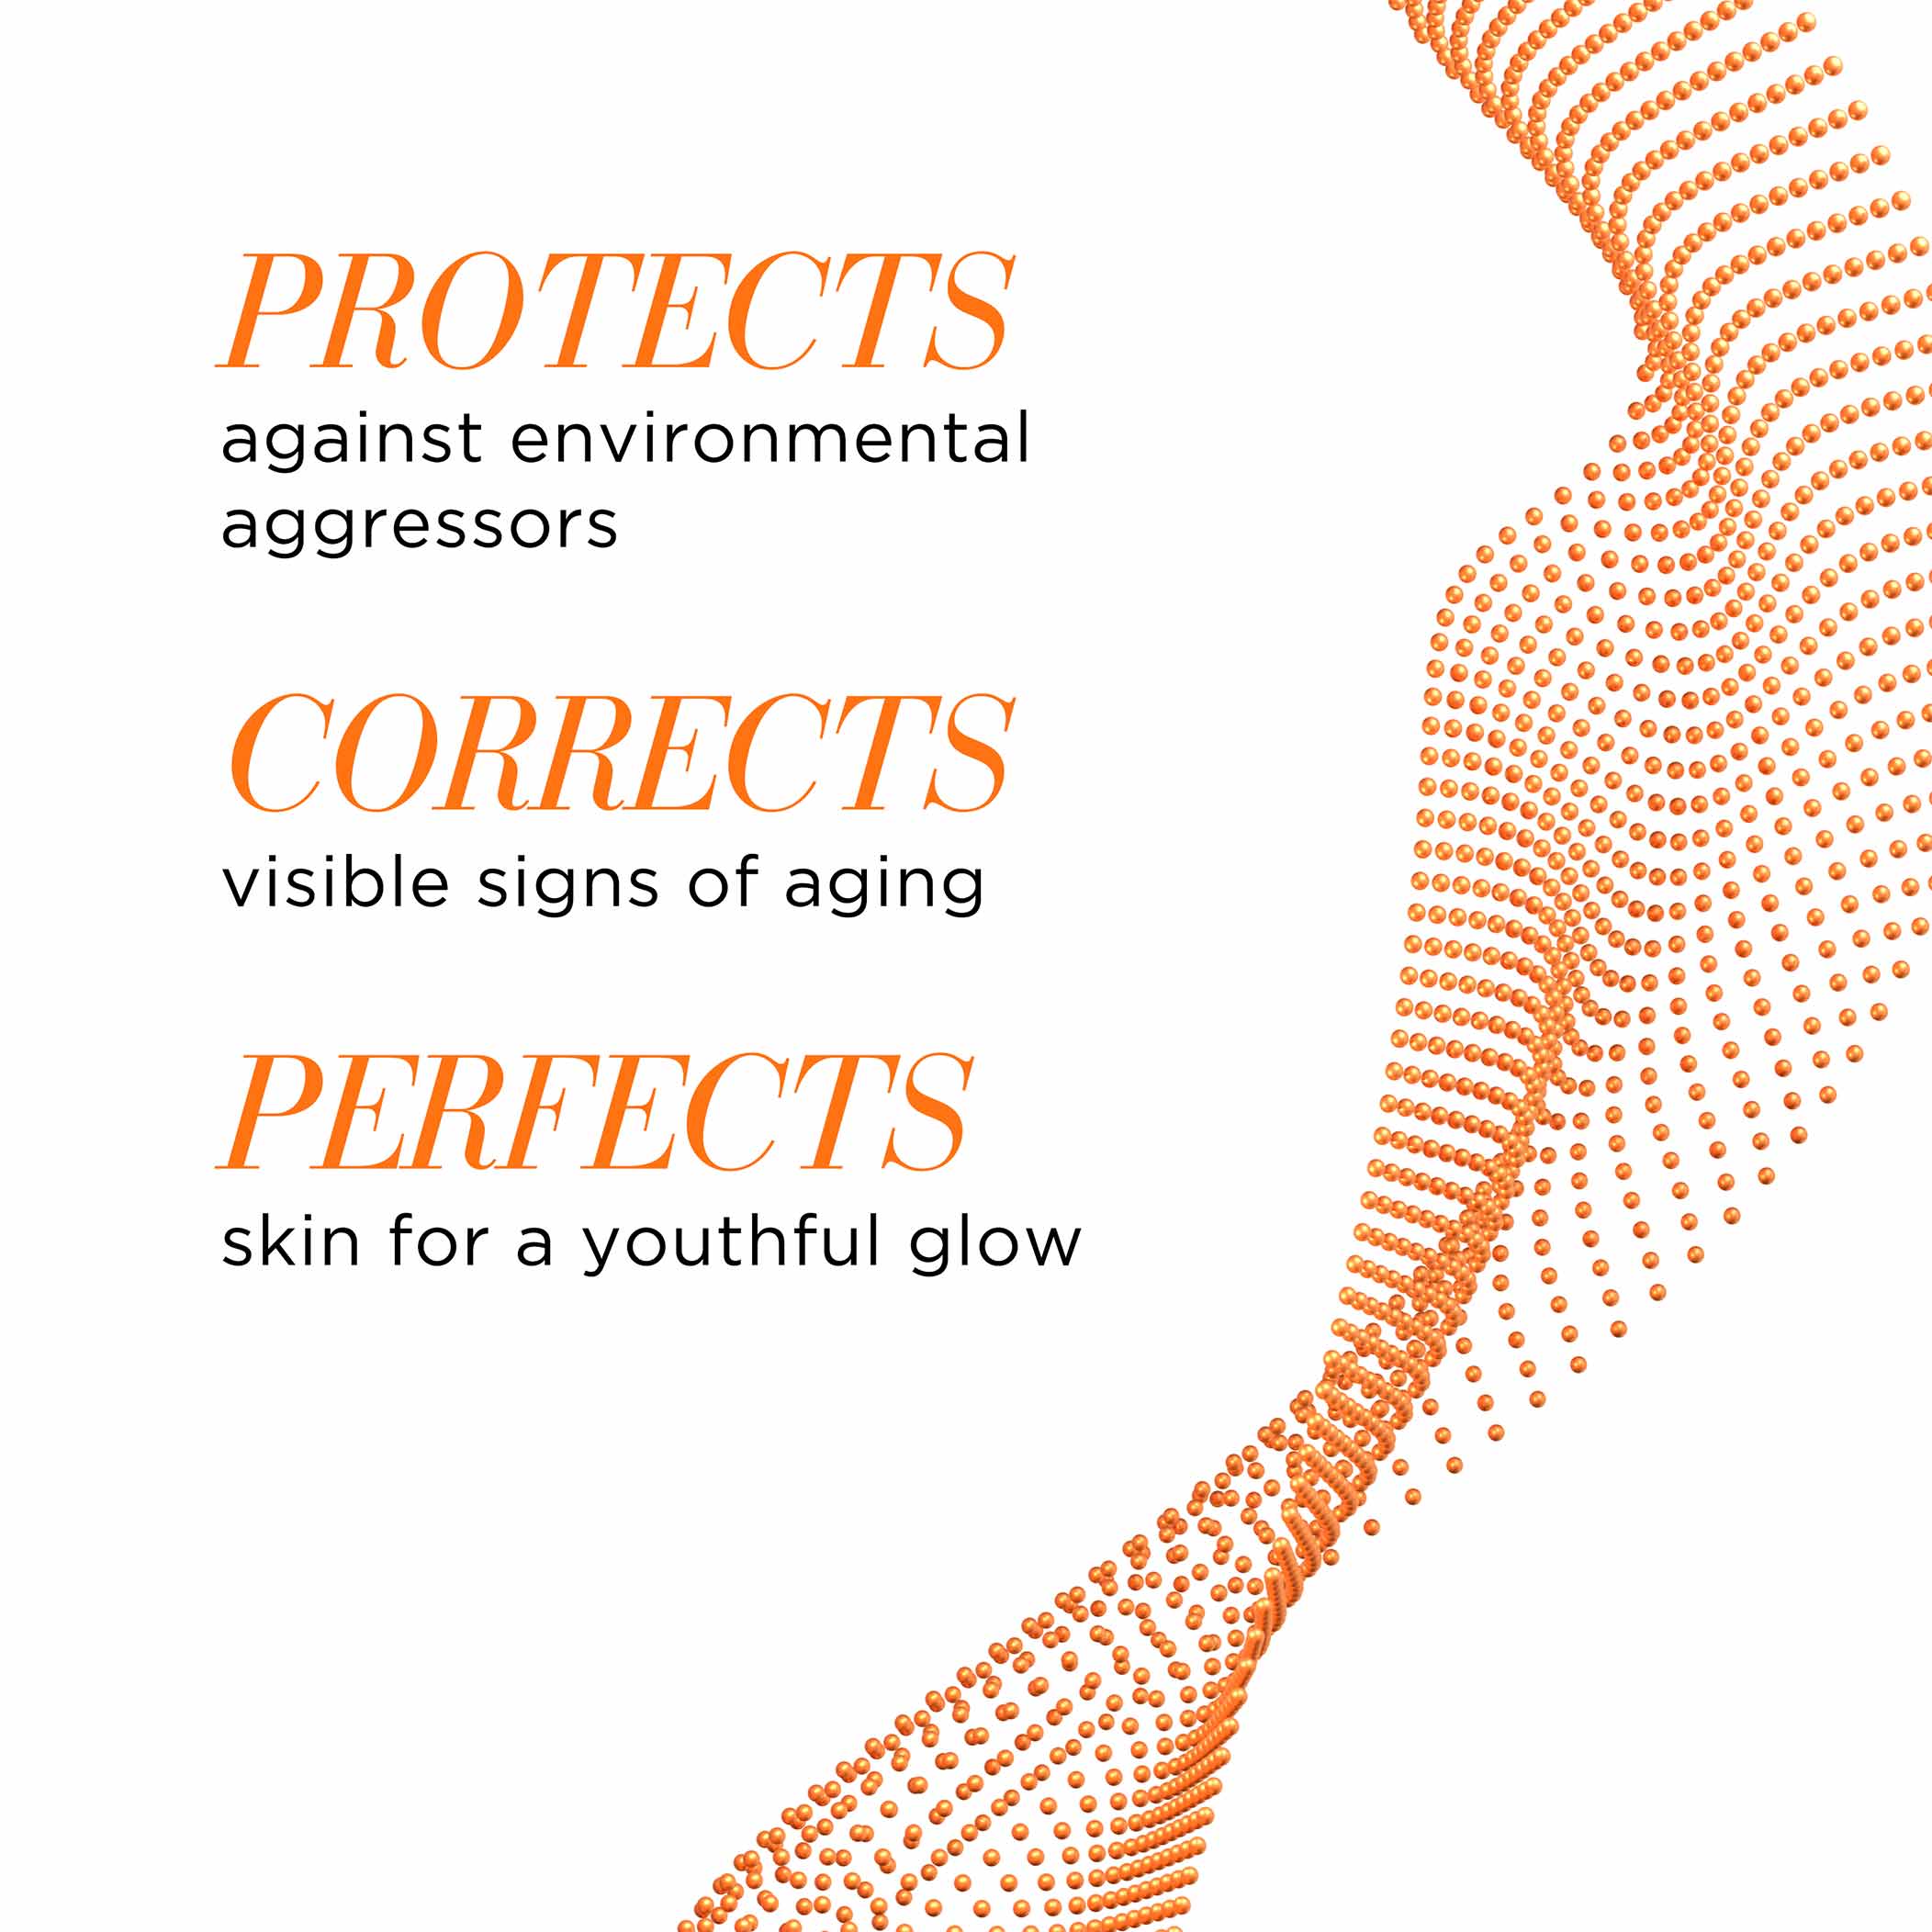 Protects against environment aggressors. Corrects visible signs of aging, Perfects skin for a youthful glow.